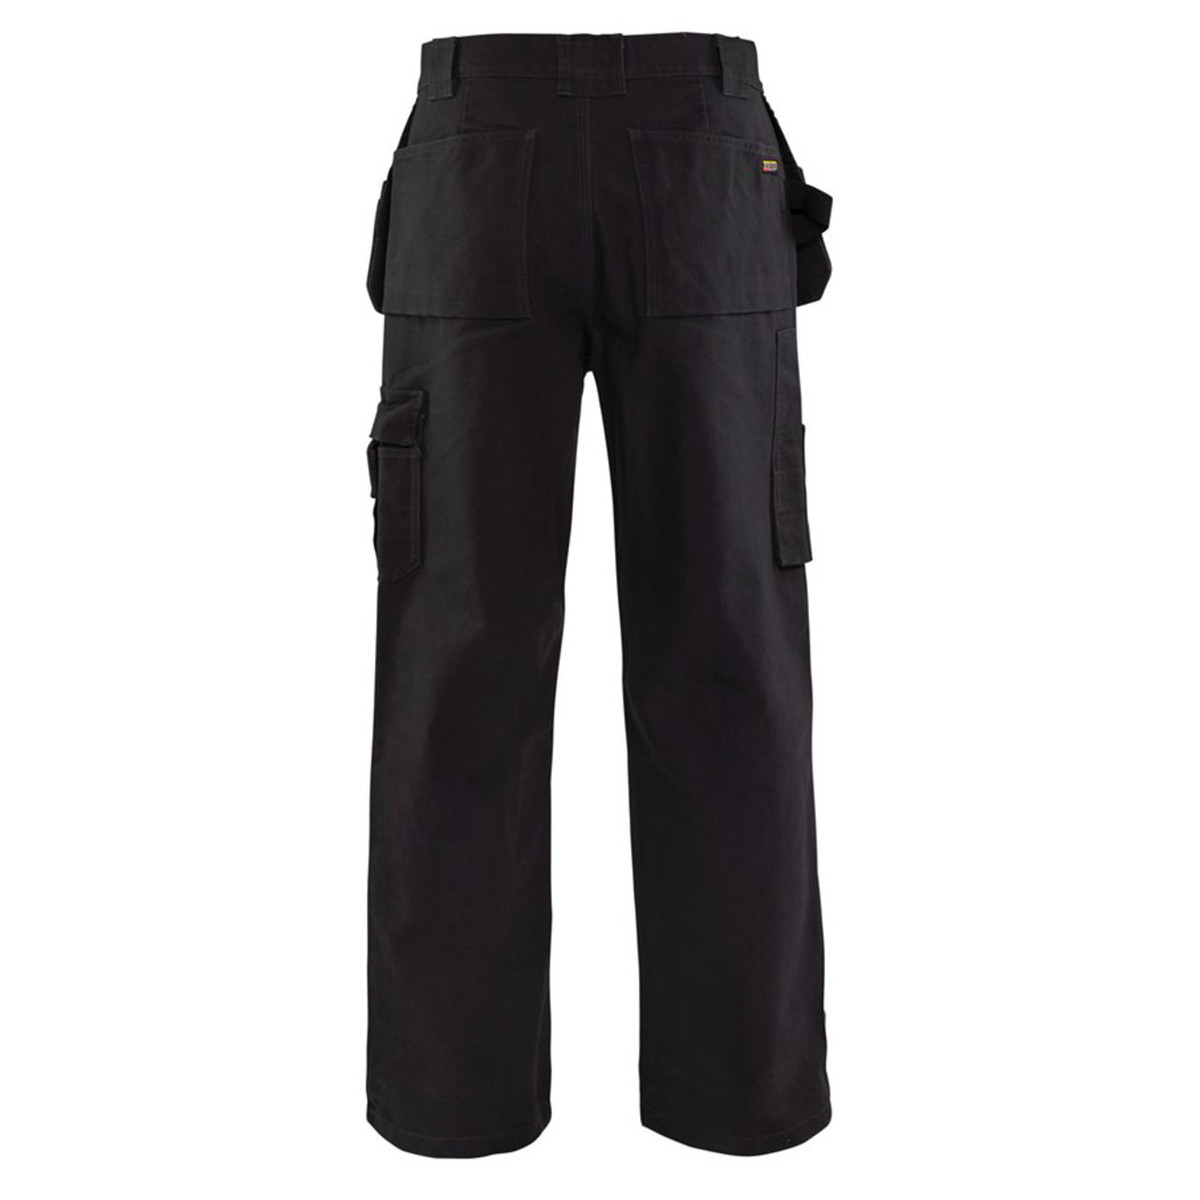 Blaklader 7990 10oz Women's Work Pants with Stretch and Utility Pockets - Navy  Blue/Black